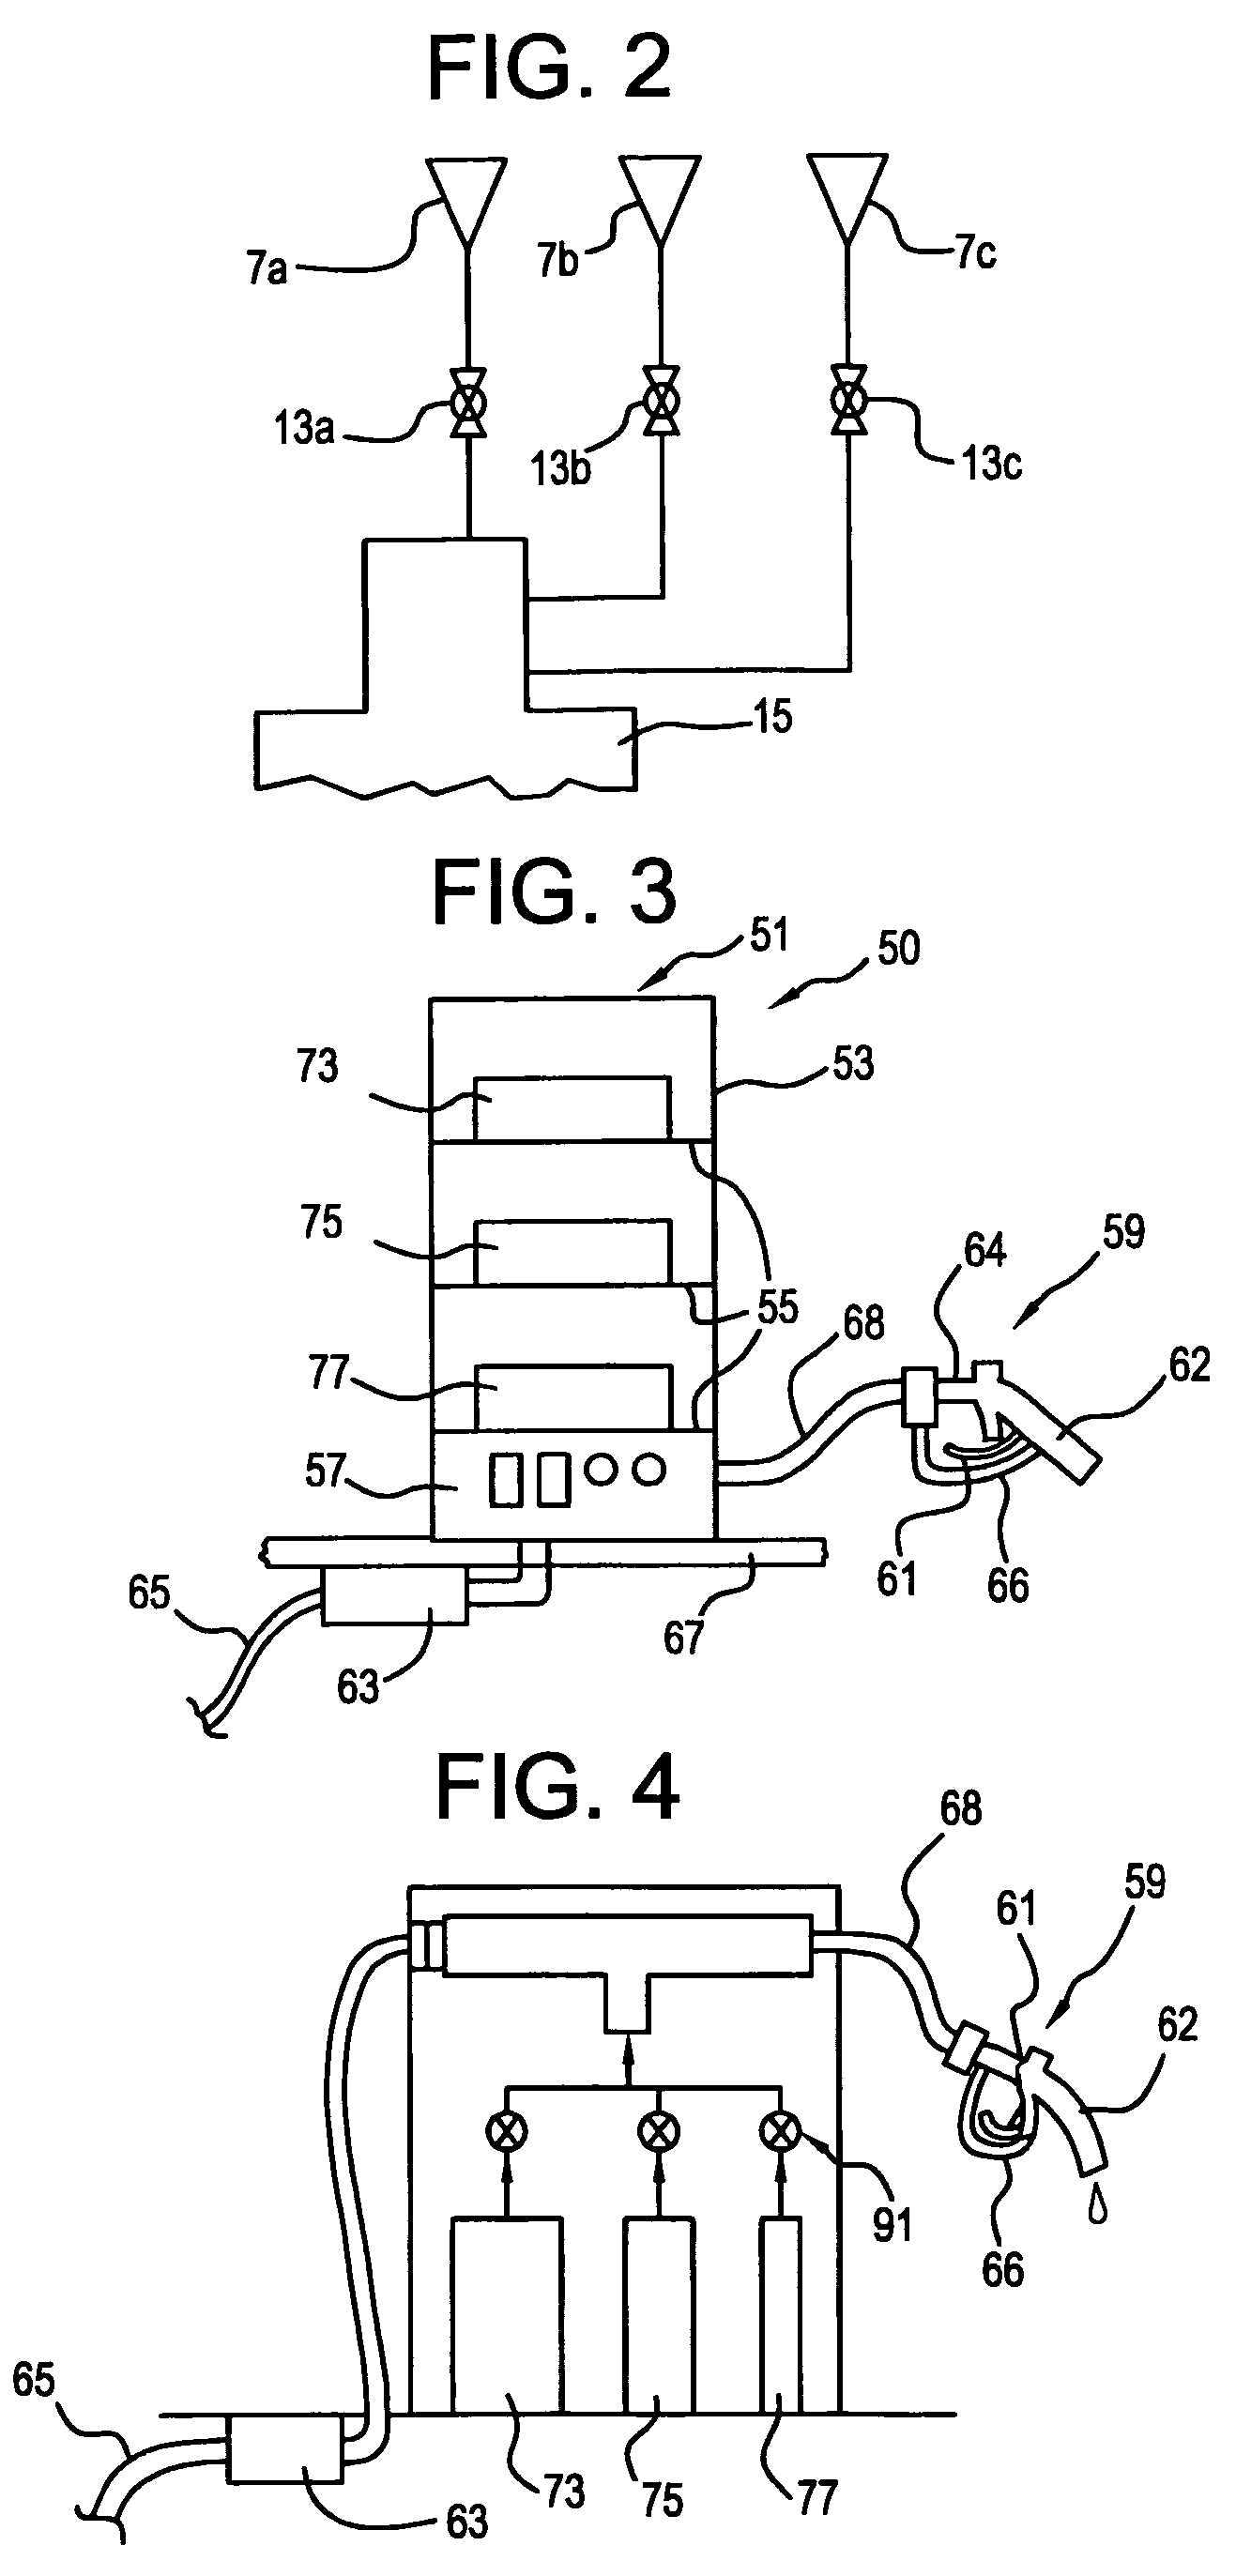 System and method for dispensing beverages